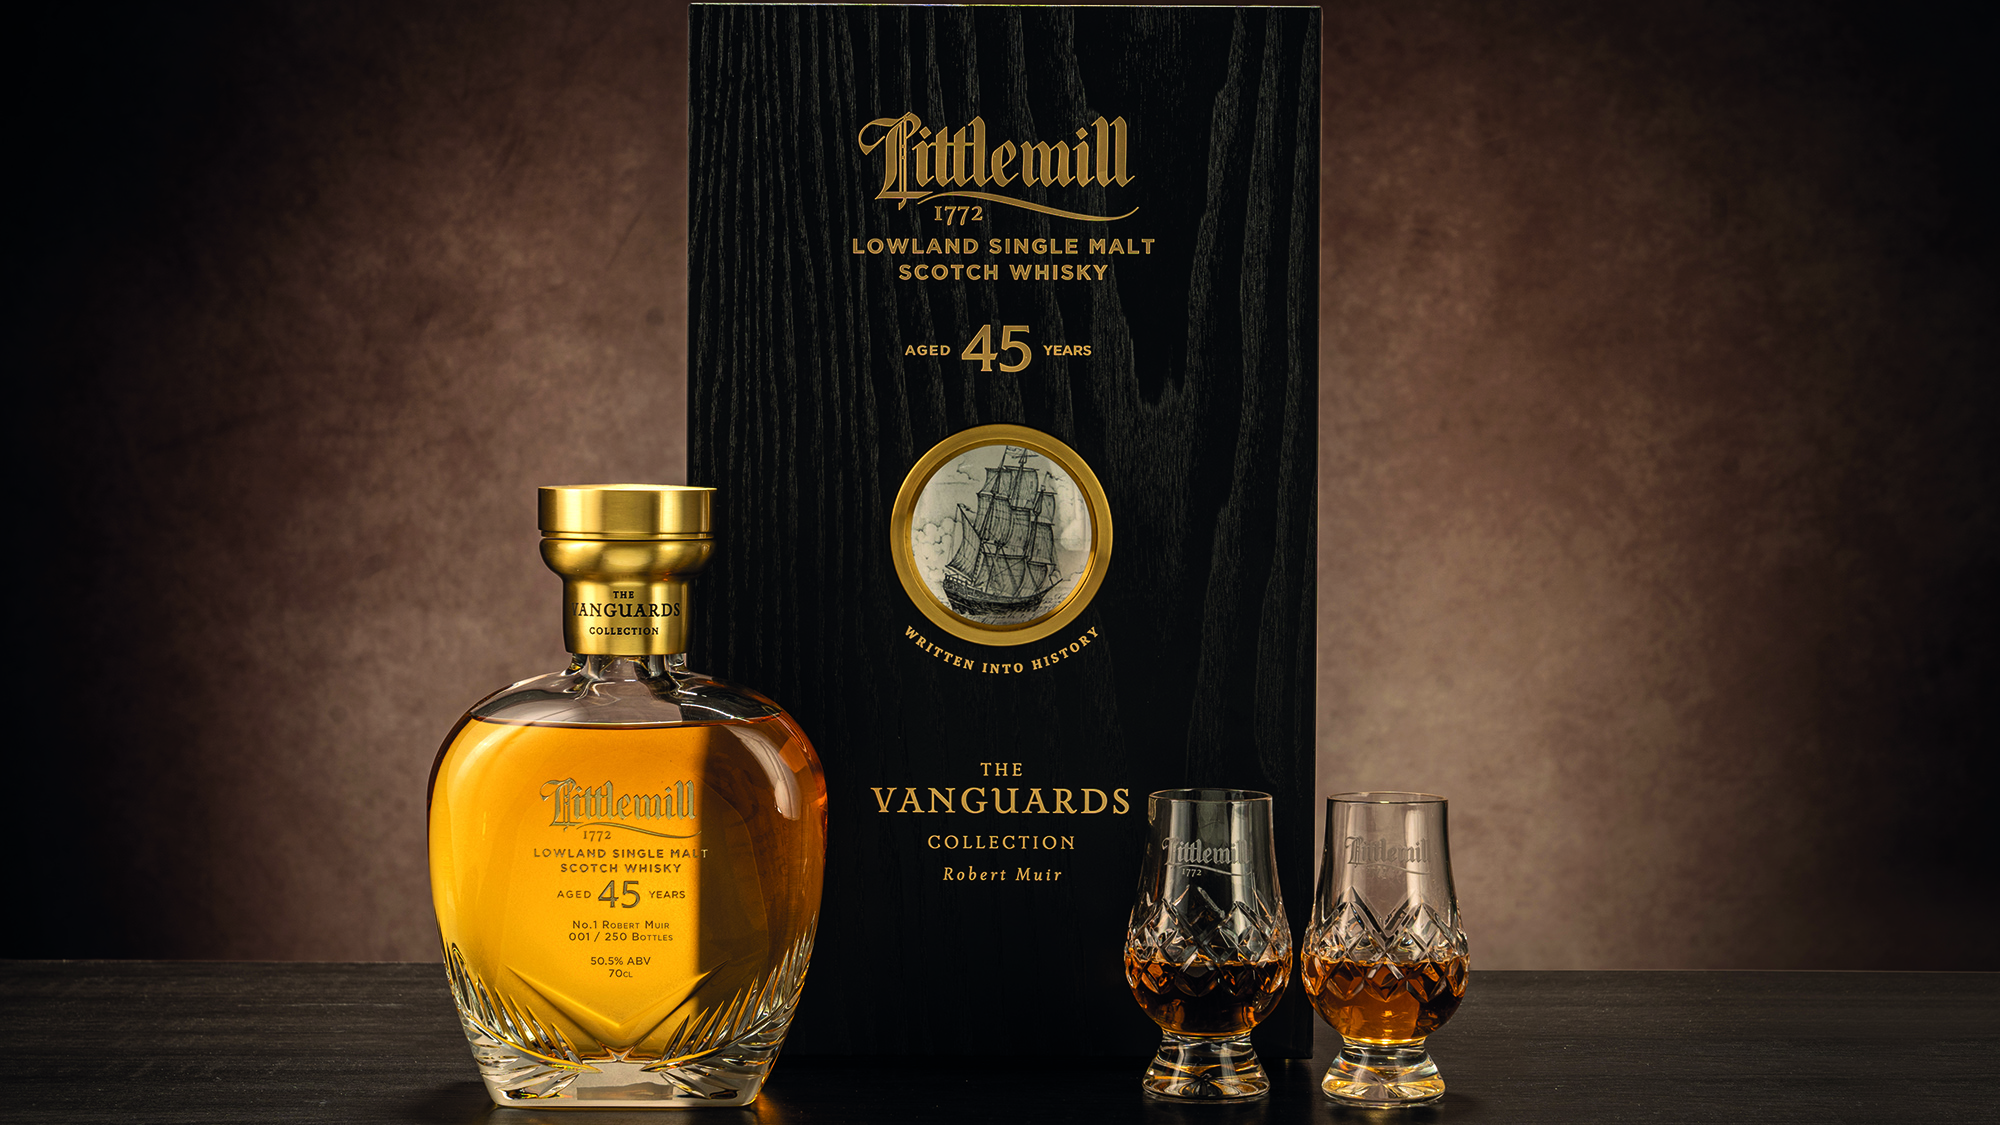 Littlemill Debuts 45 Year Old Single Malt As Chapter One In Vanguards Collection